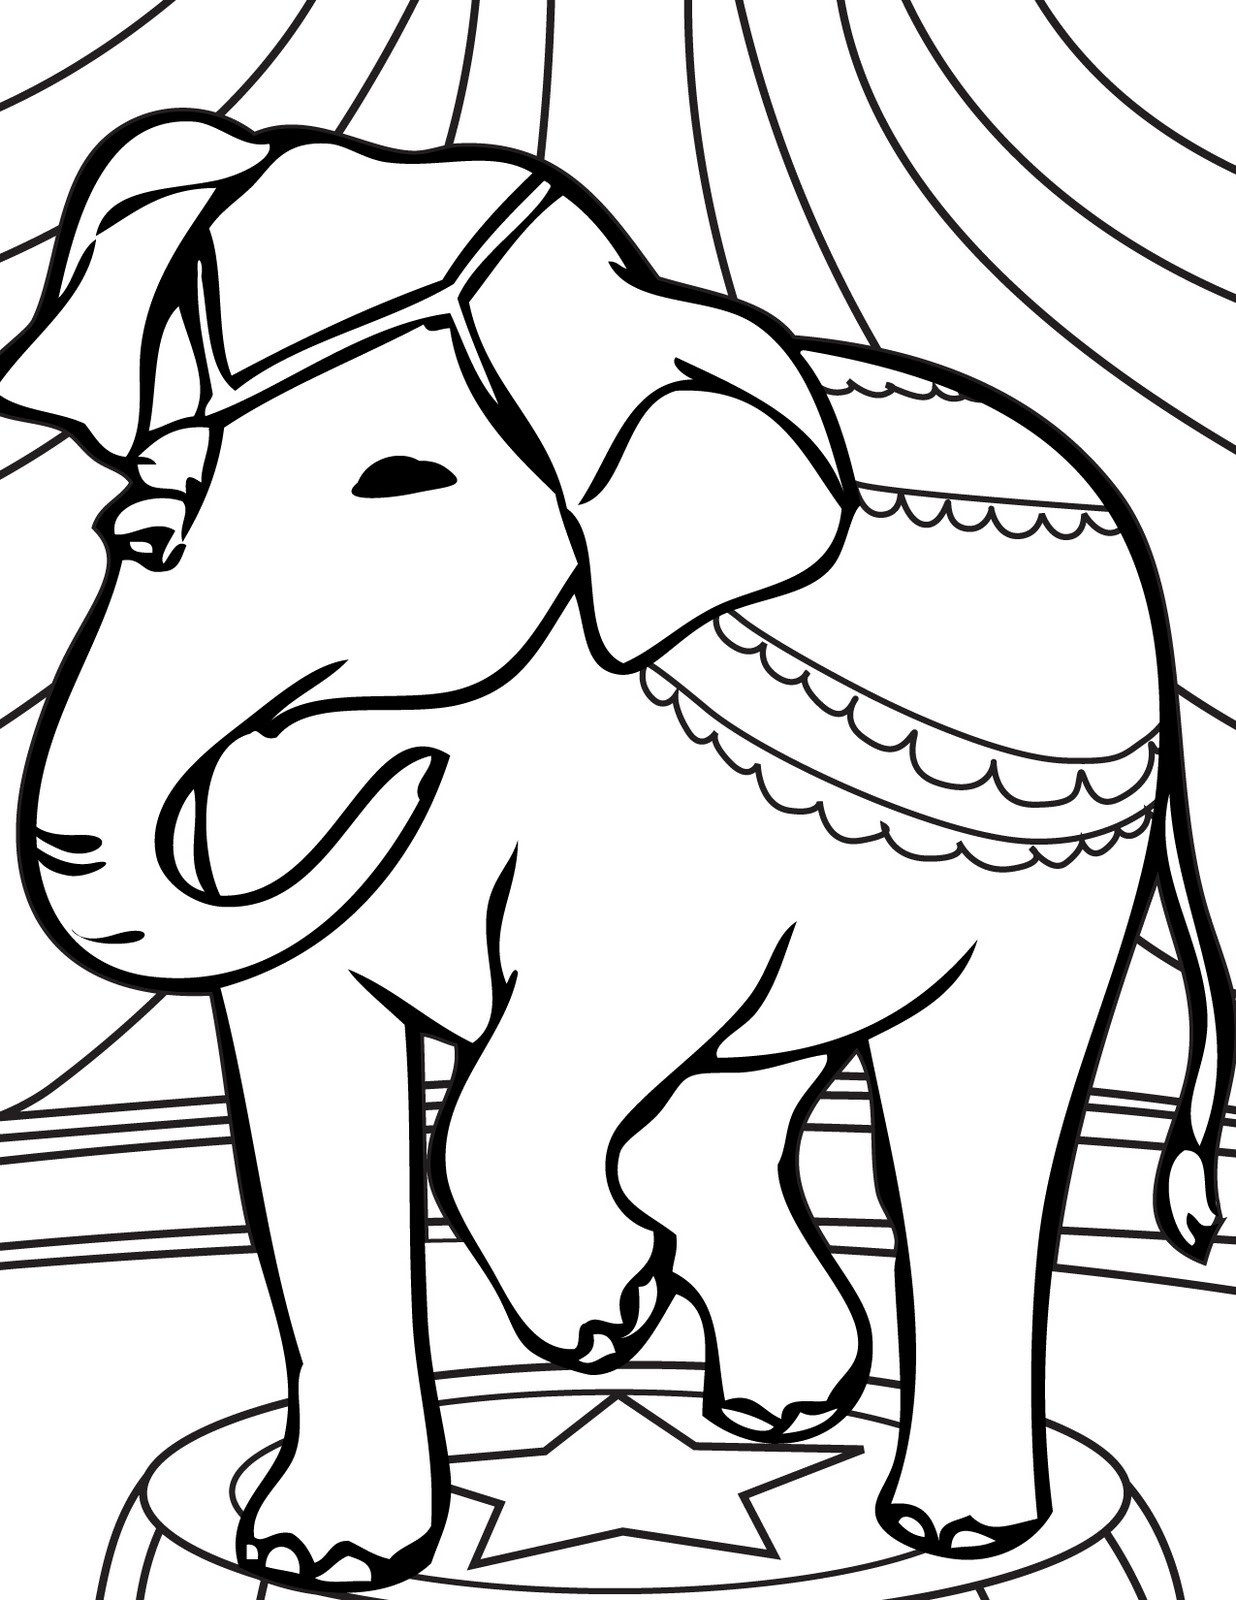 Coloring Pages For Children
 transmissionpress Circus Elephant Coloring Pages